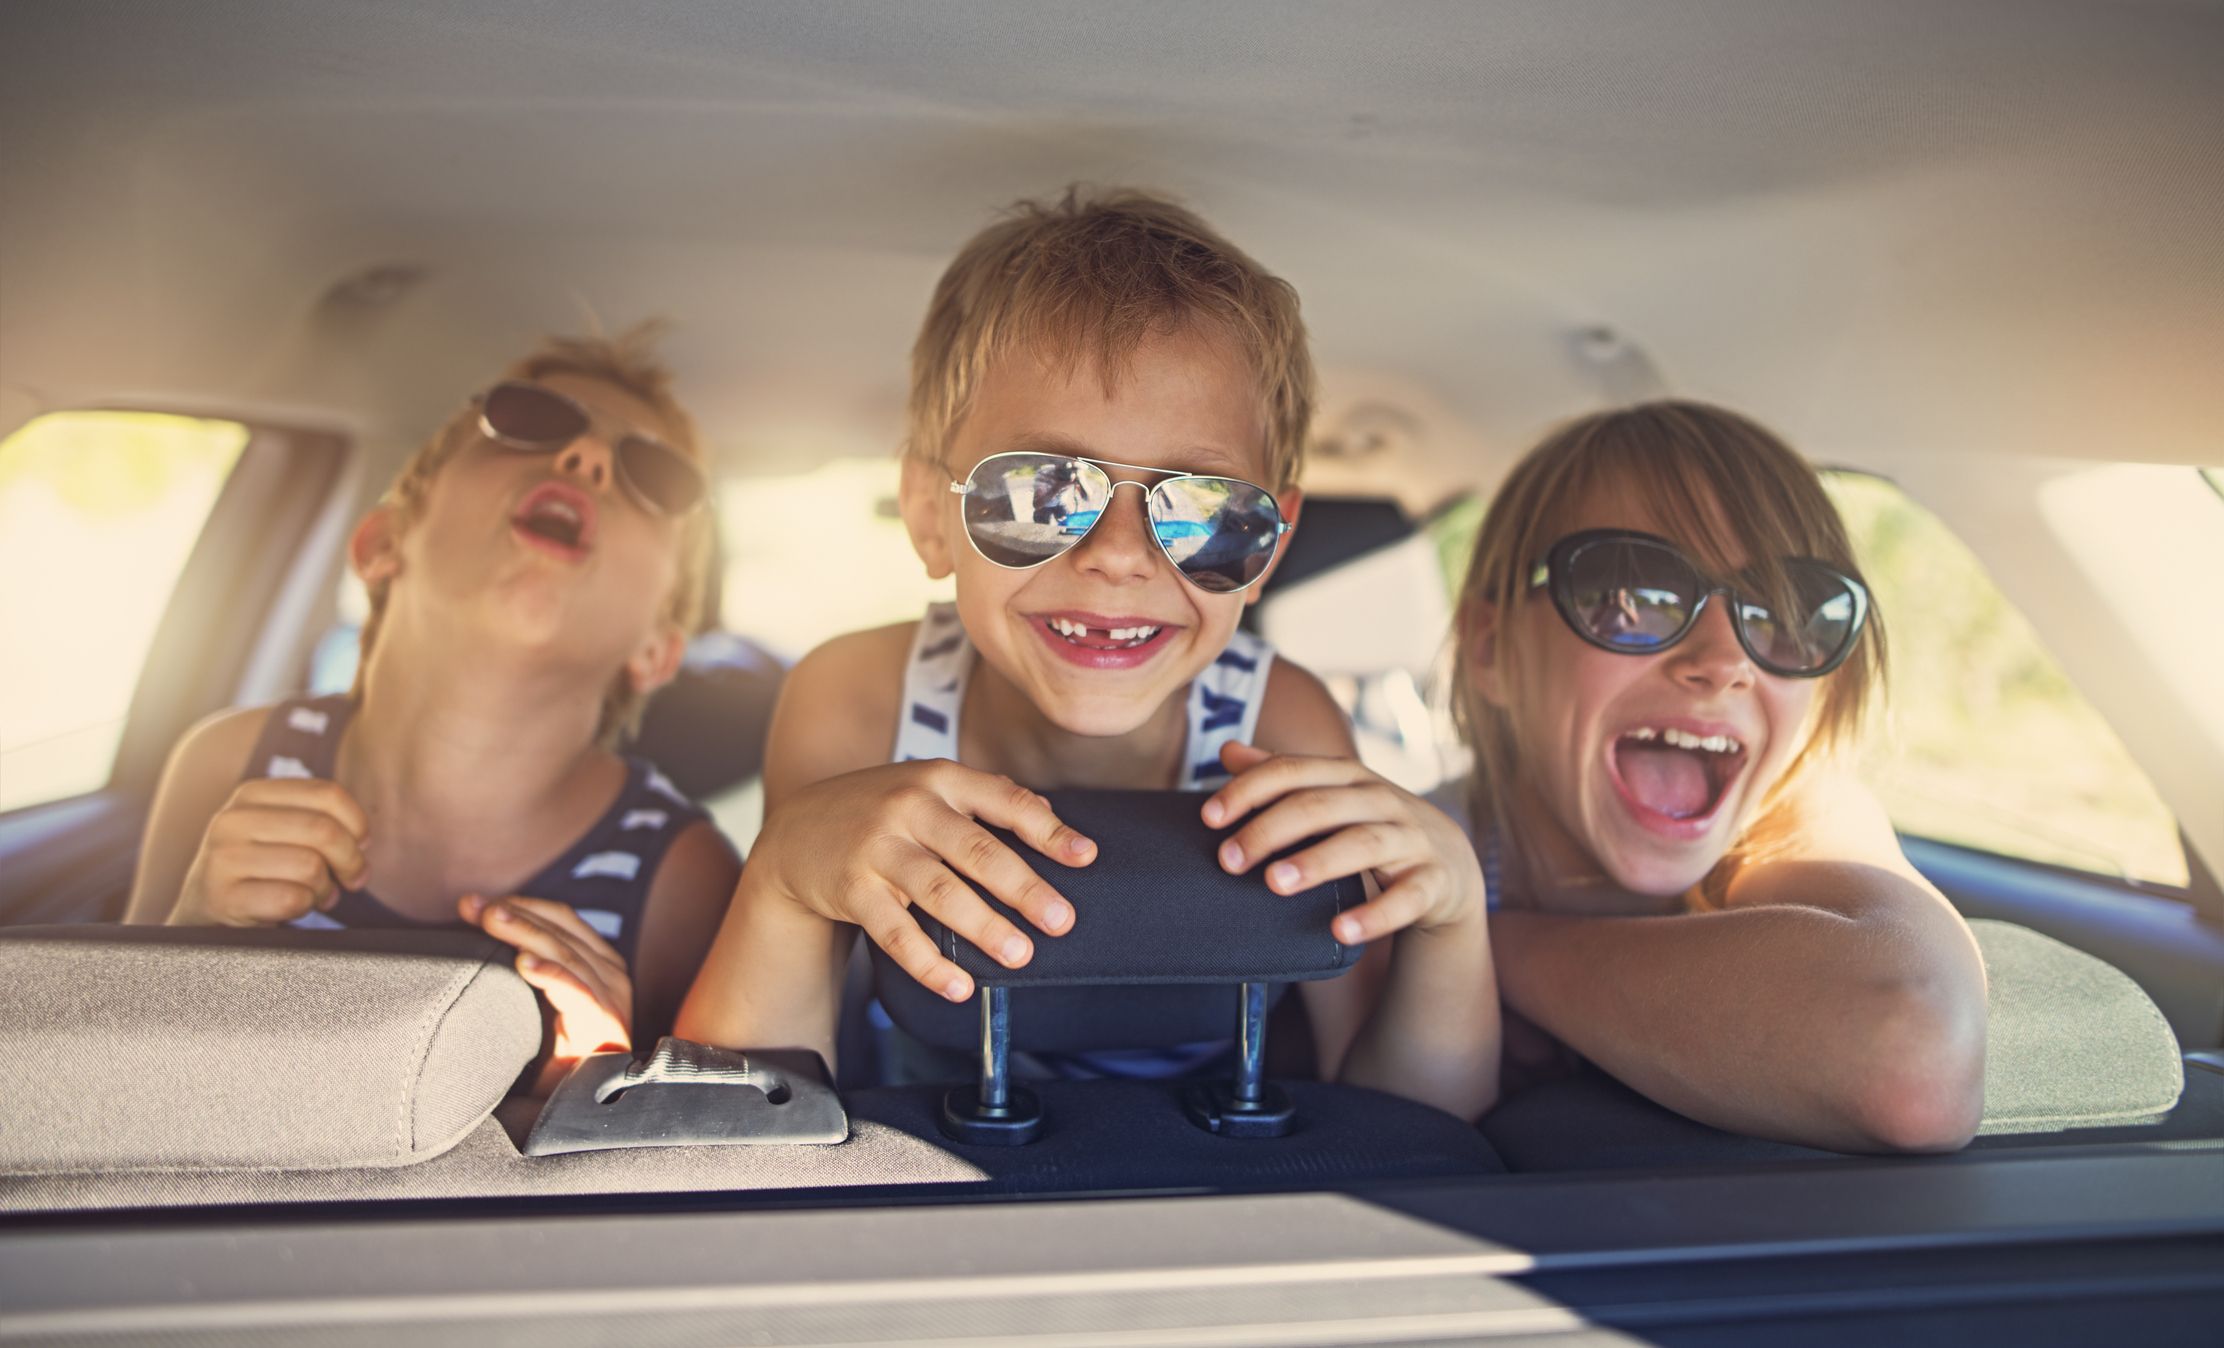 Keep the kids happy and healthy on your next road trip, Snack